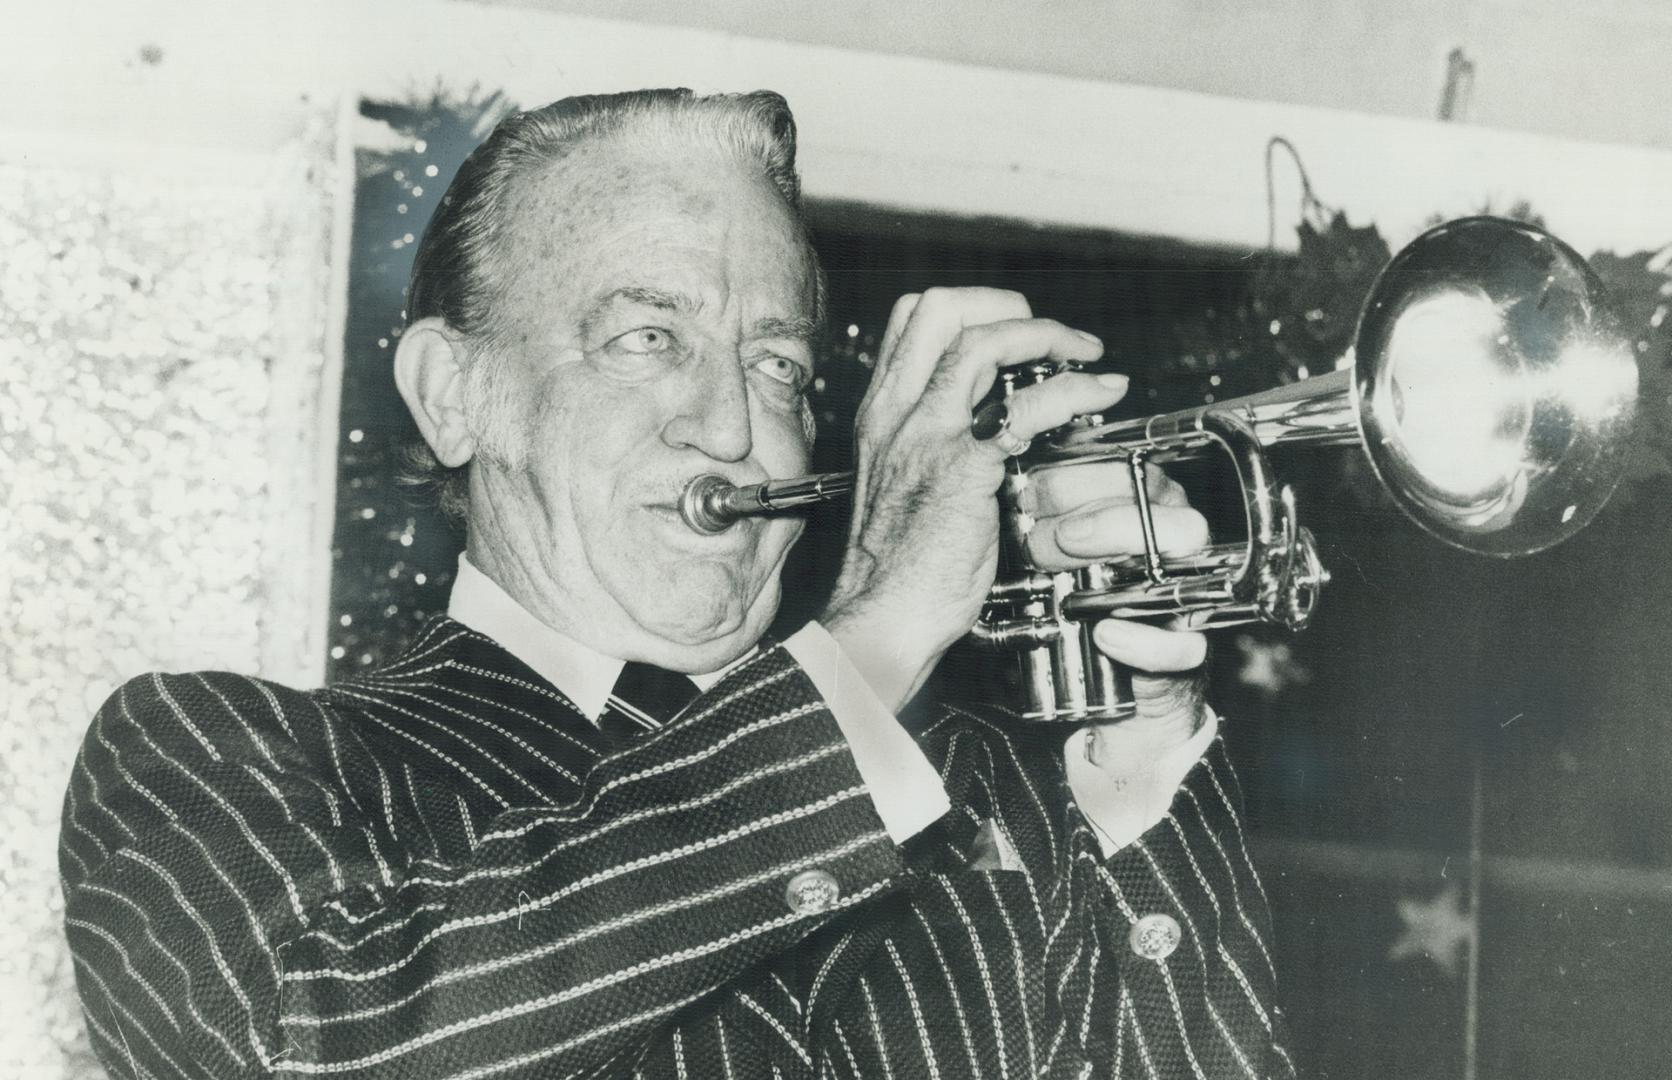 It all came together in 1943, Harry James was something more than just a part of the big band era, Peter Goddard says